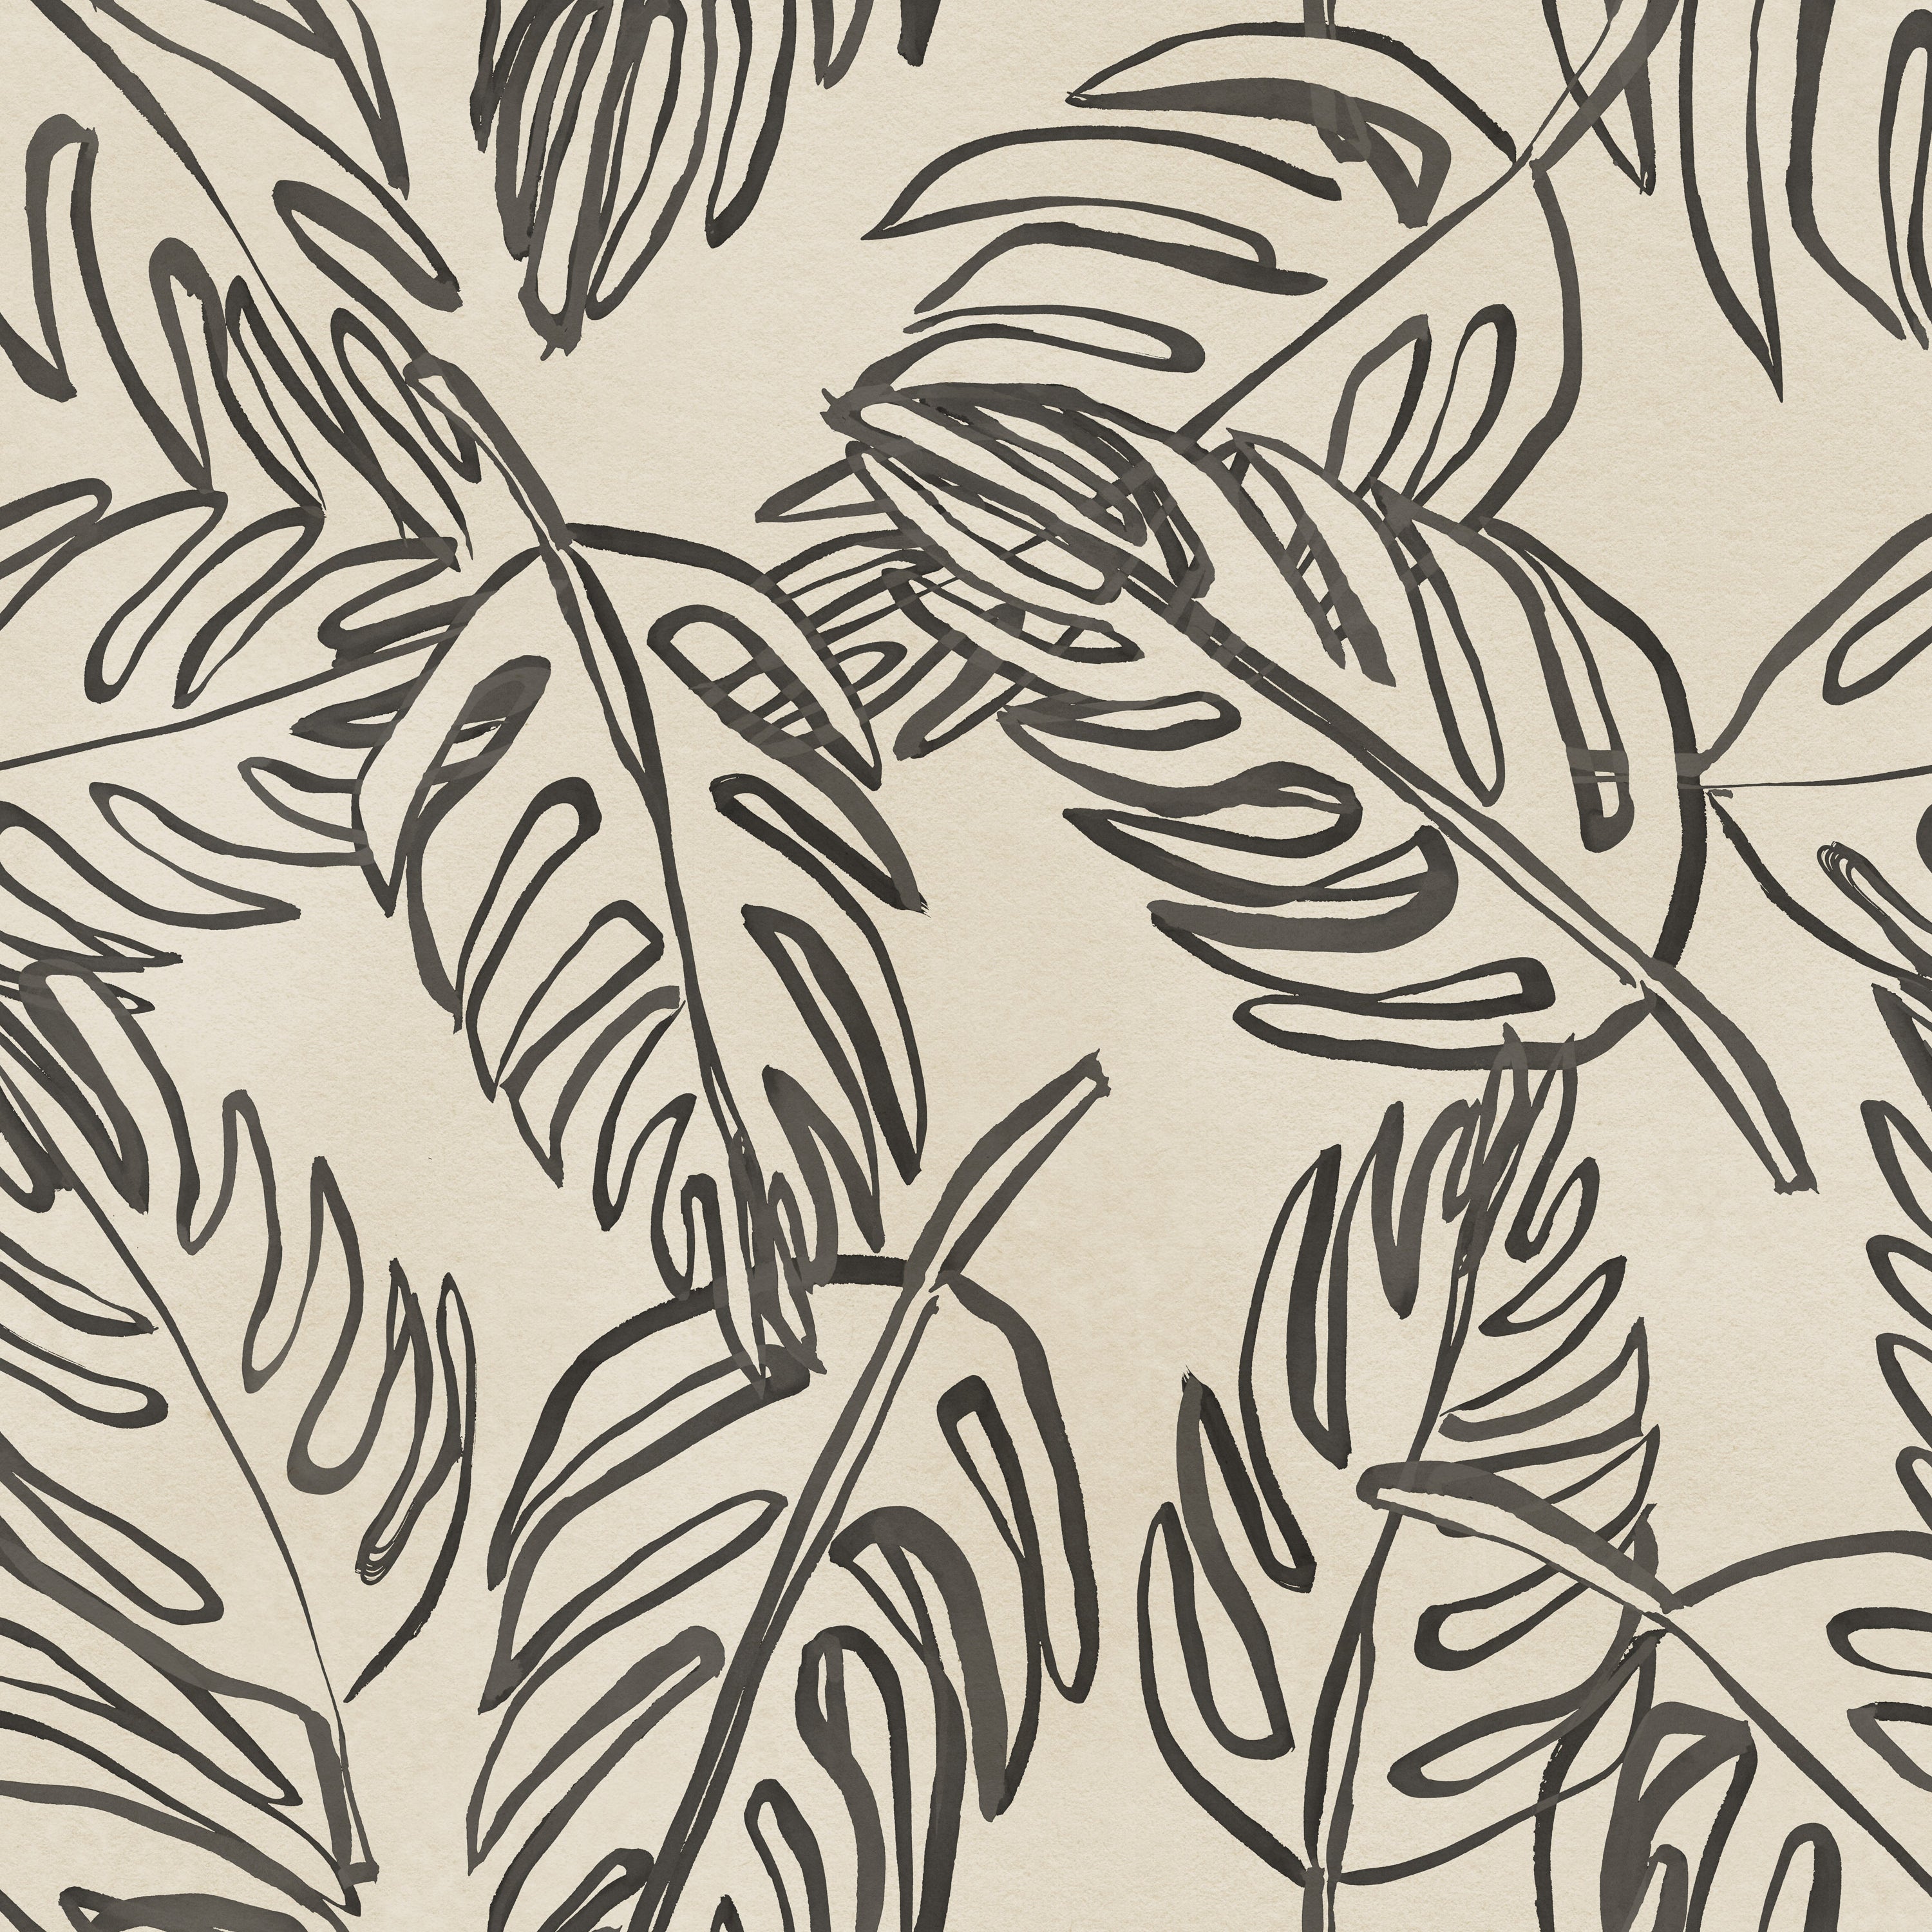 Detail of wallpaper in a painterly leaf print in charcoal on a cream field.